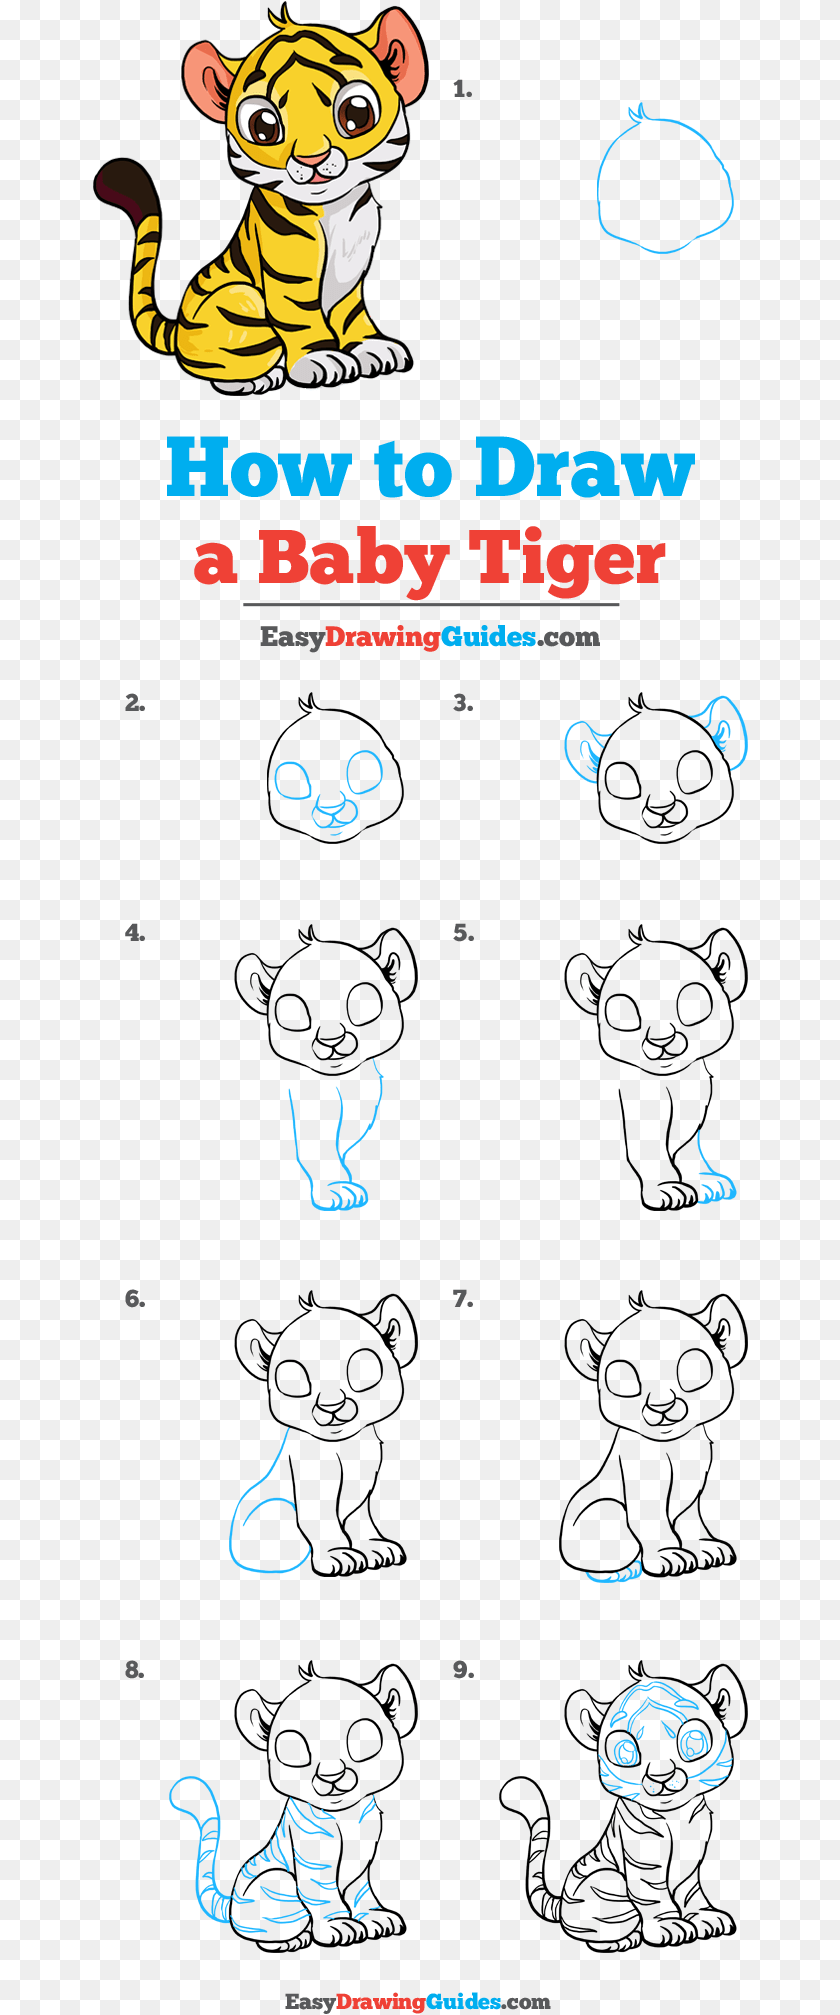 656x2015 Baby Tiger Easy How To Draw A Baby Tiger, Animal, Lion, Mammal, Wildlife Transparent PNG